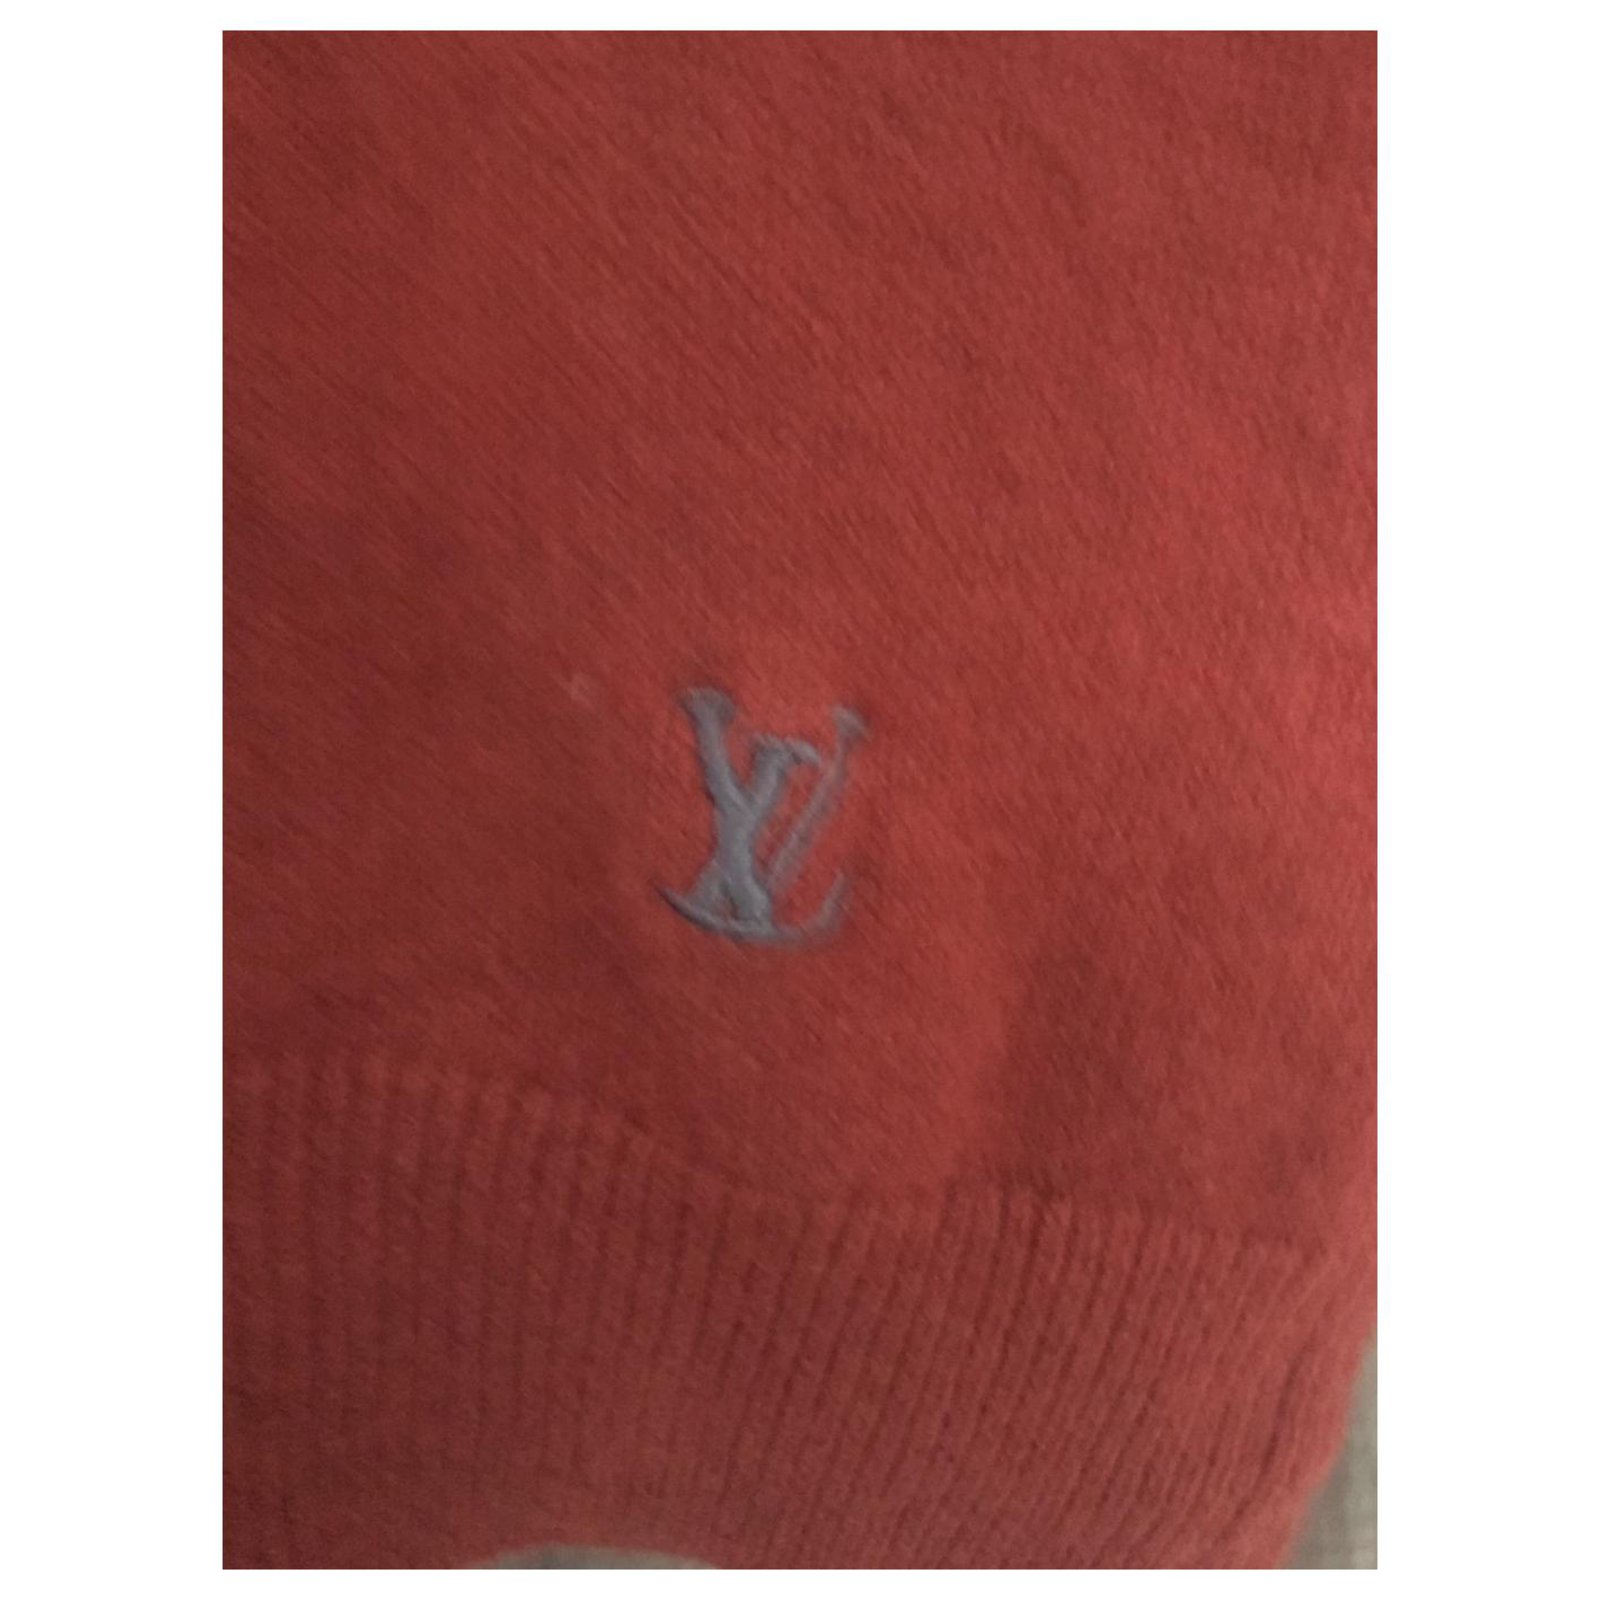 Louis Vuitton - Authenticated Knitwear - Cashmere Red Plain for Women, Good Condition